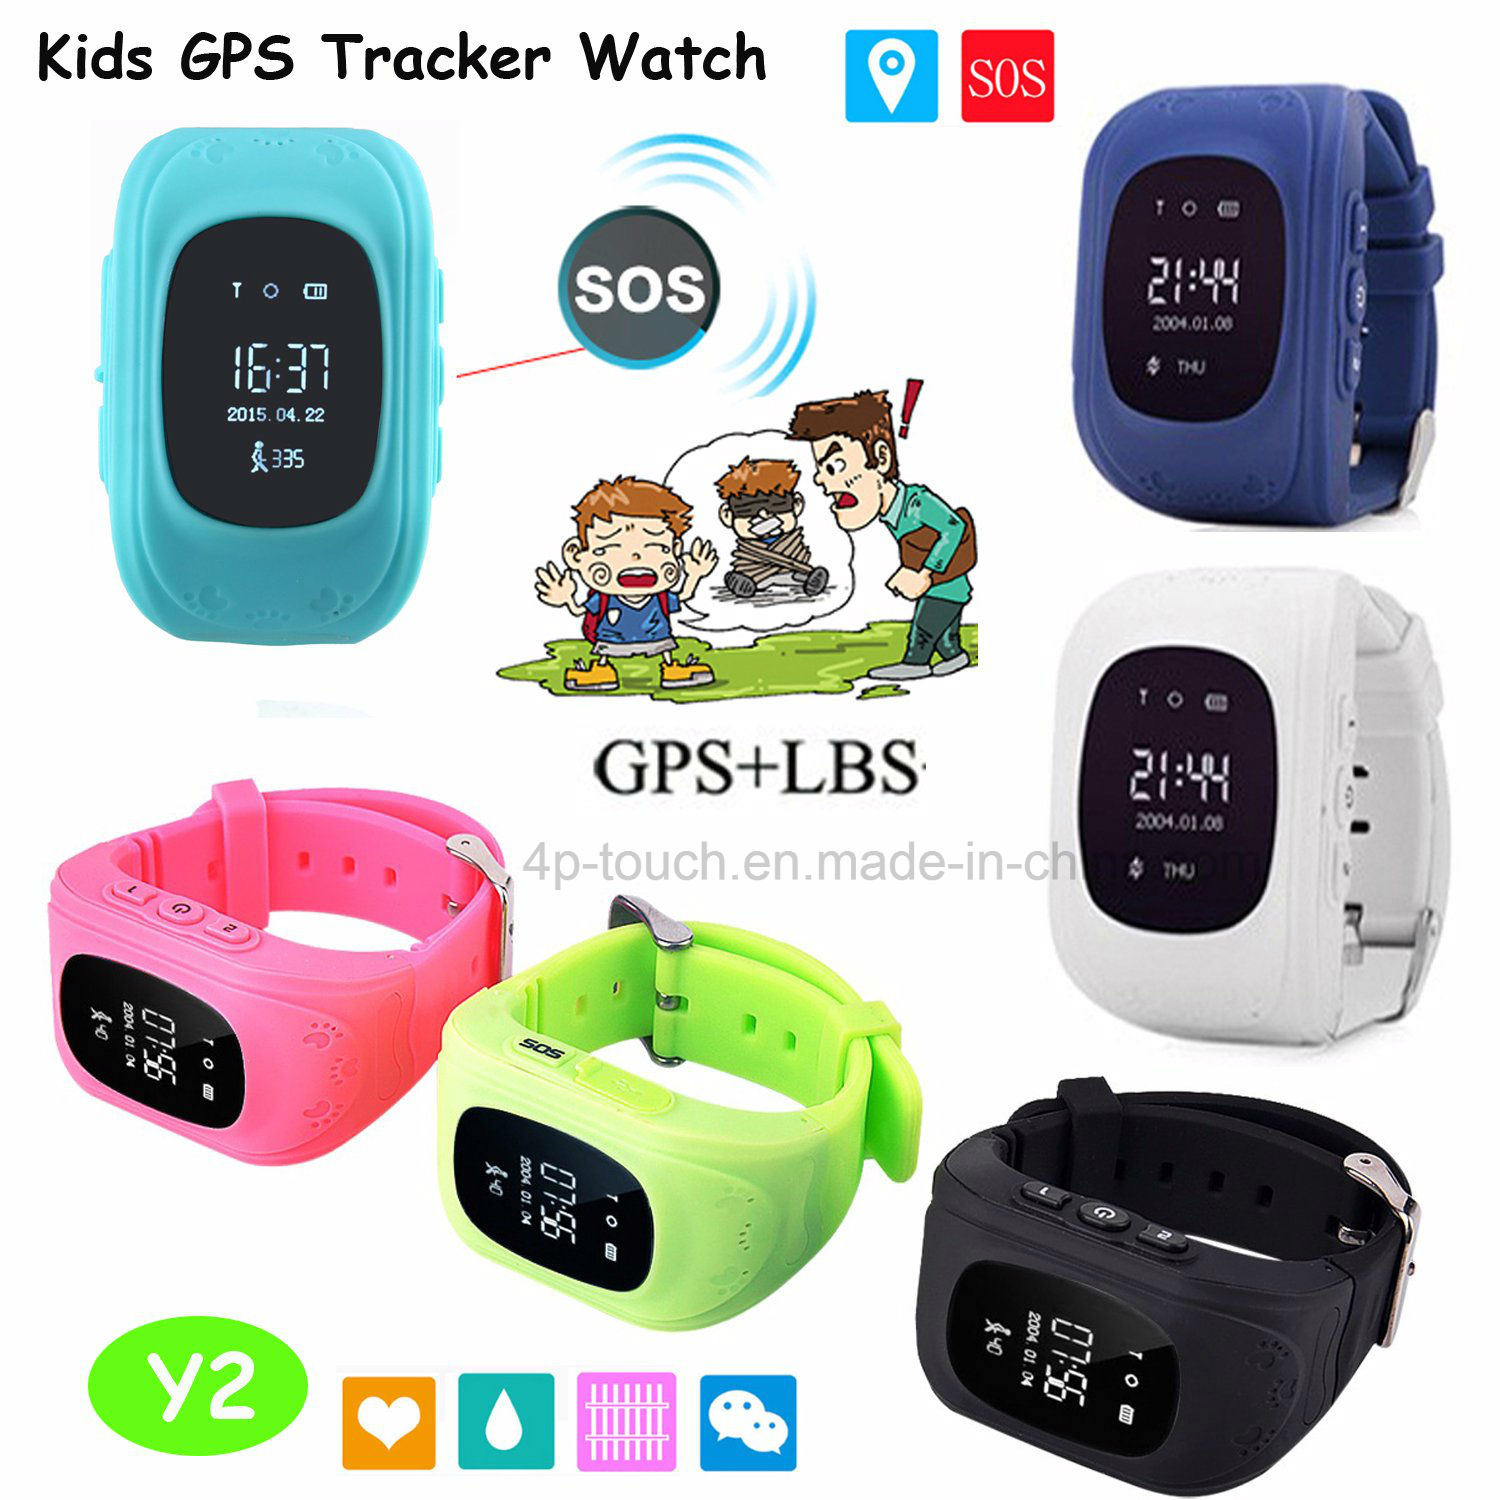 Kids GPS Tracker Watch with Sos Function for Child (Y2)